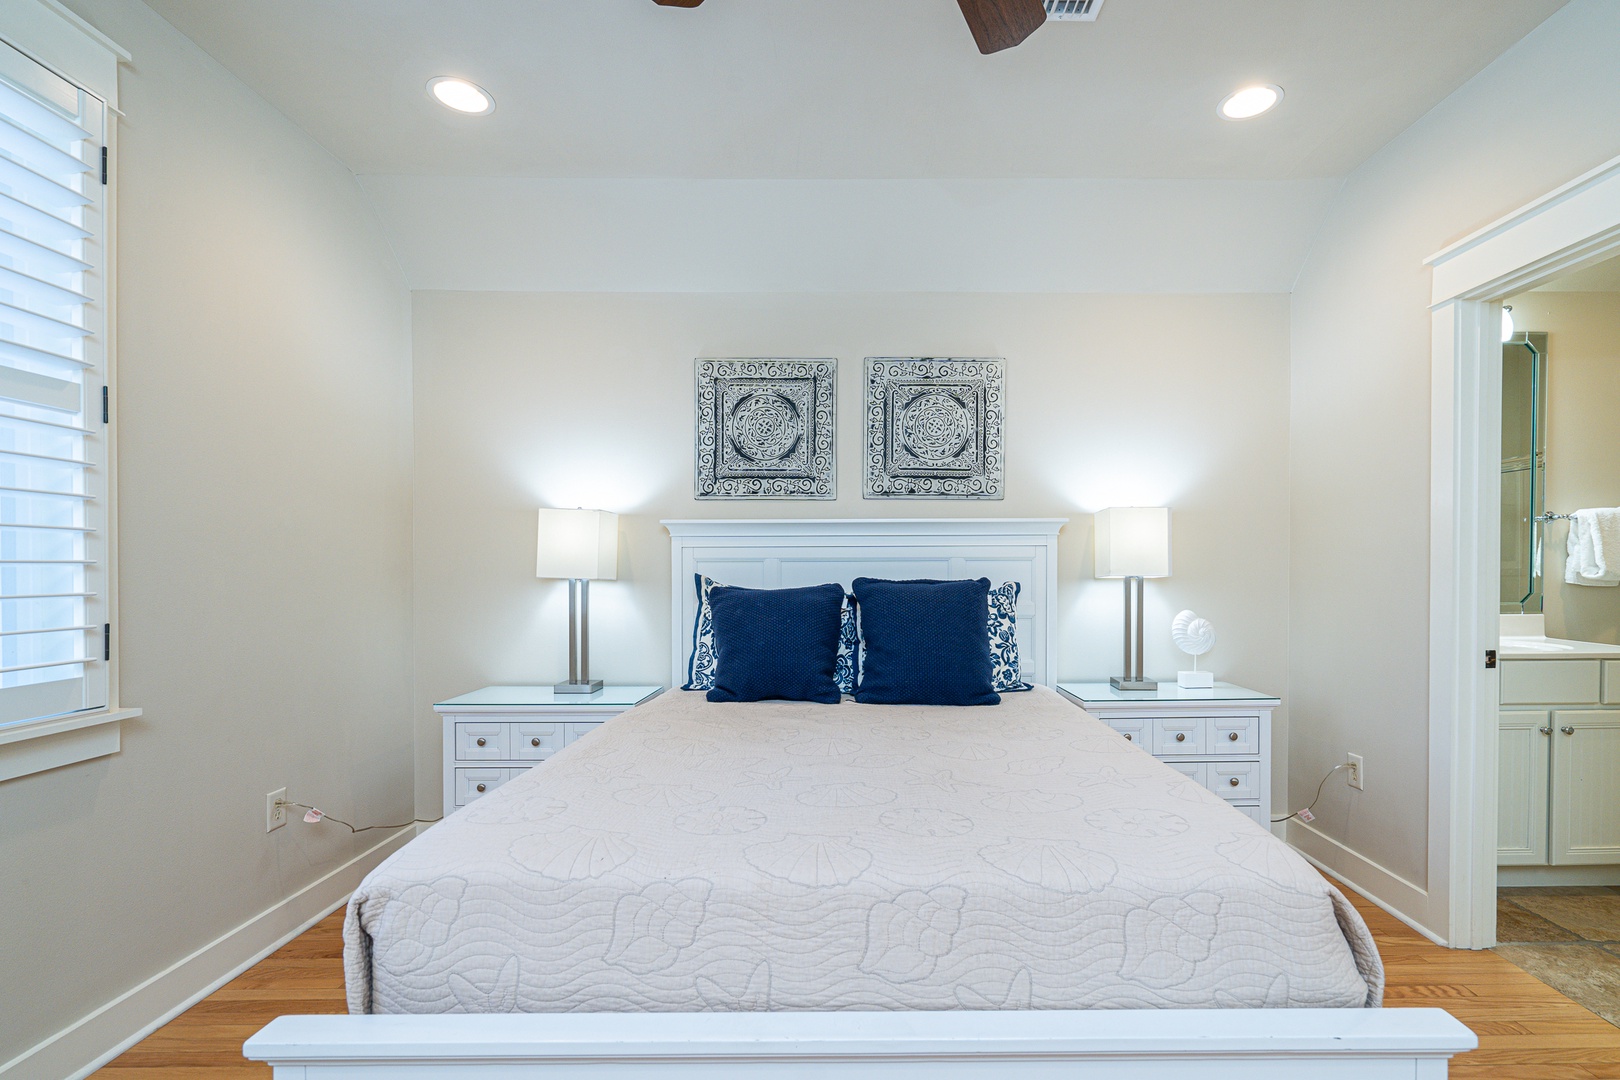 This 2nd-floor bedroom features a plush queen bed & private ensuite